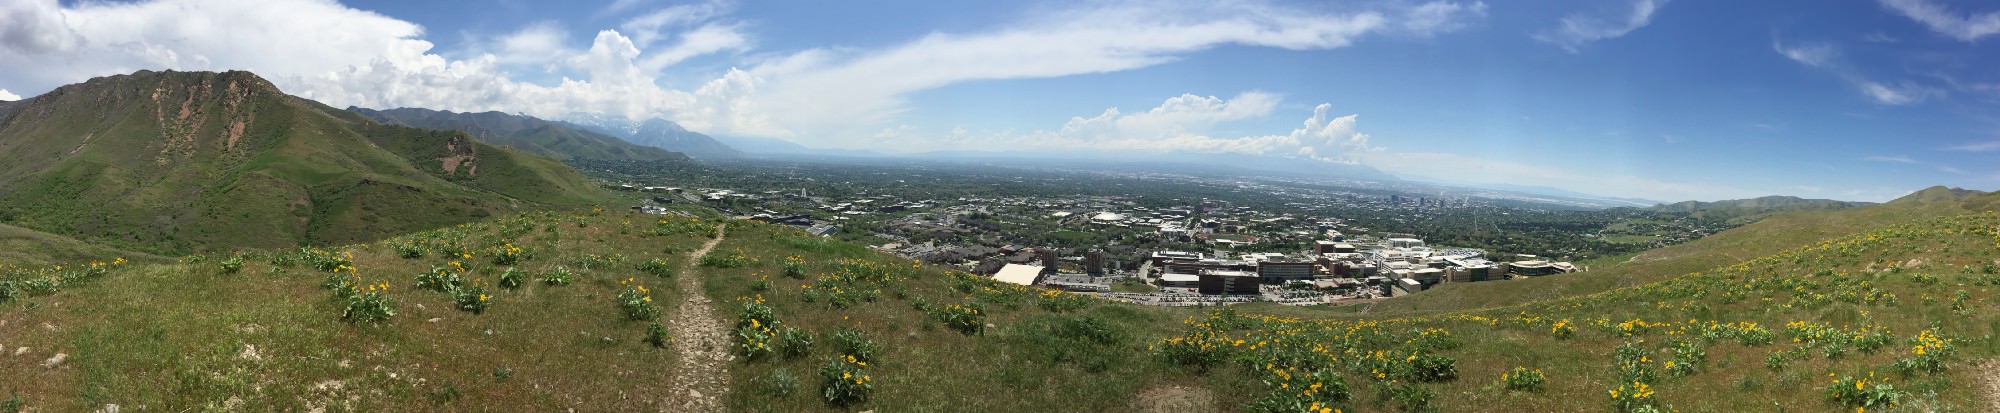 A panoramic view of Salt Lake City from the foothills of the Wasatch Range.